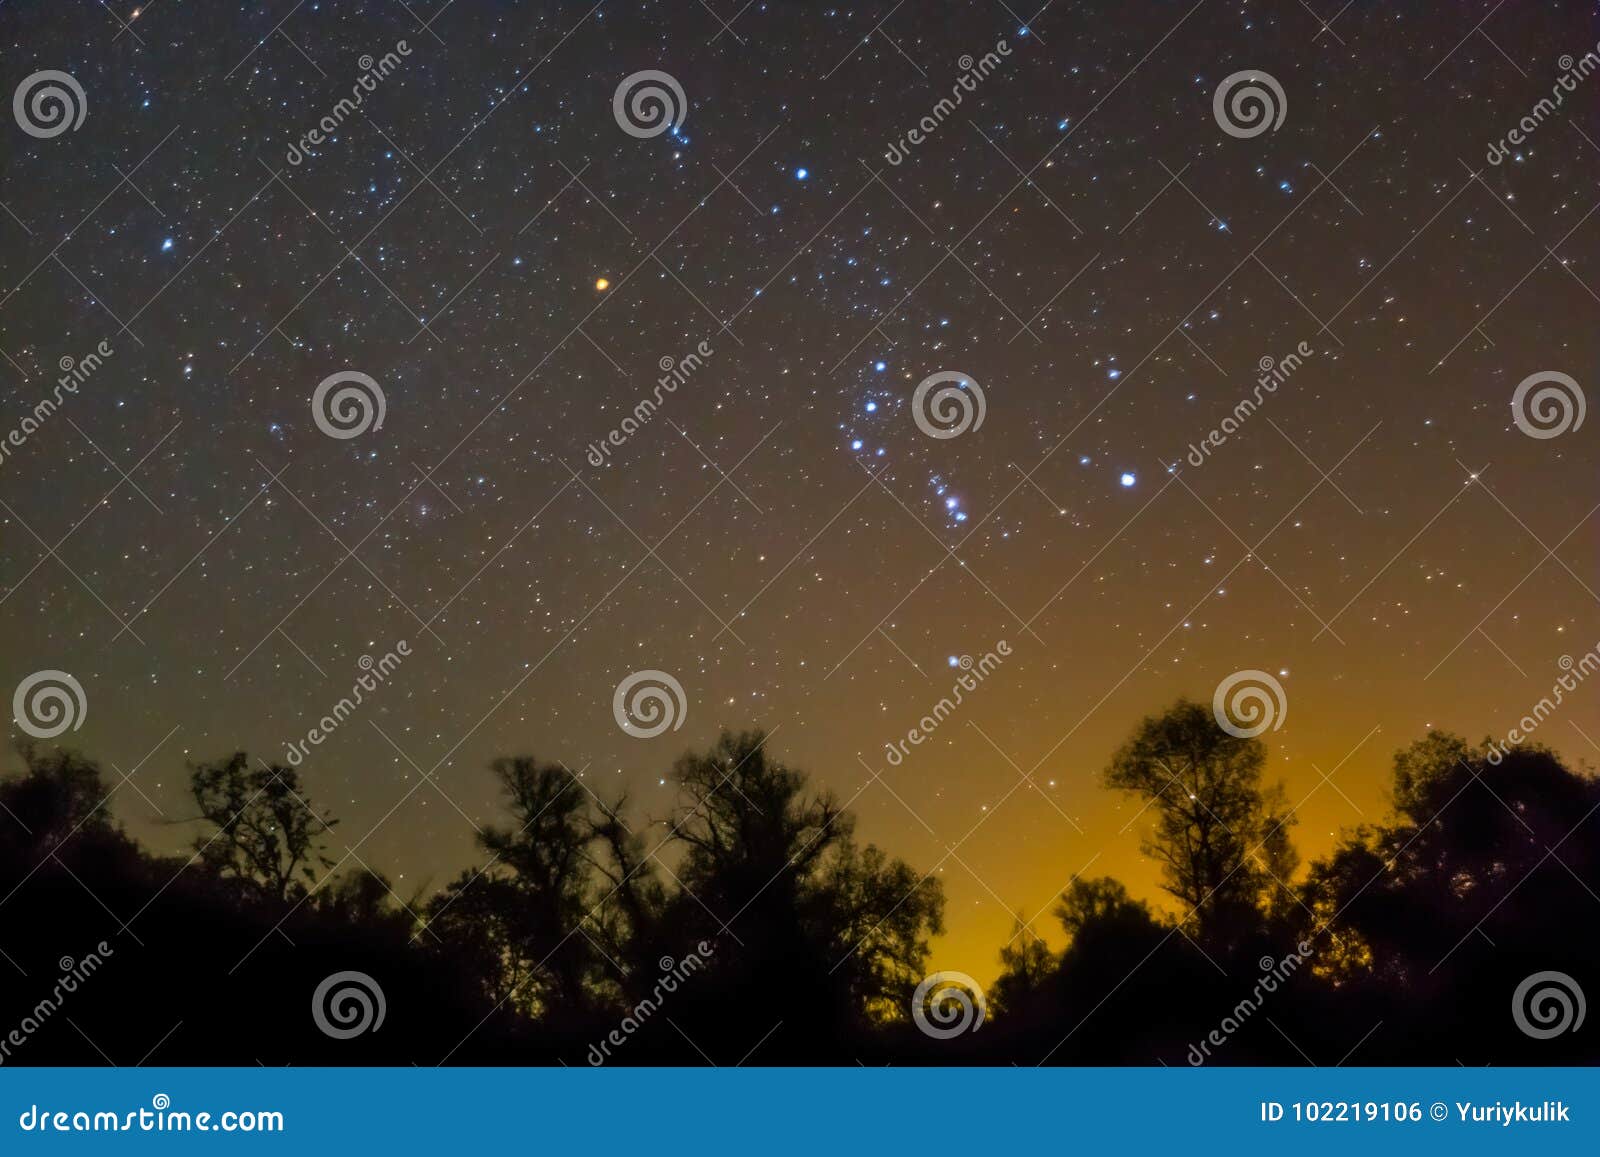 orion constellation rising over a night forest silhouette